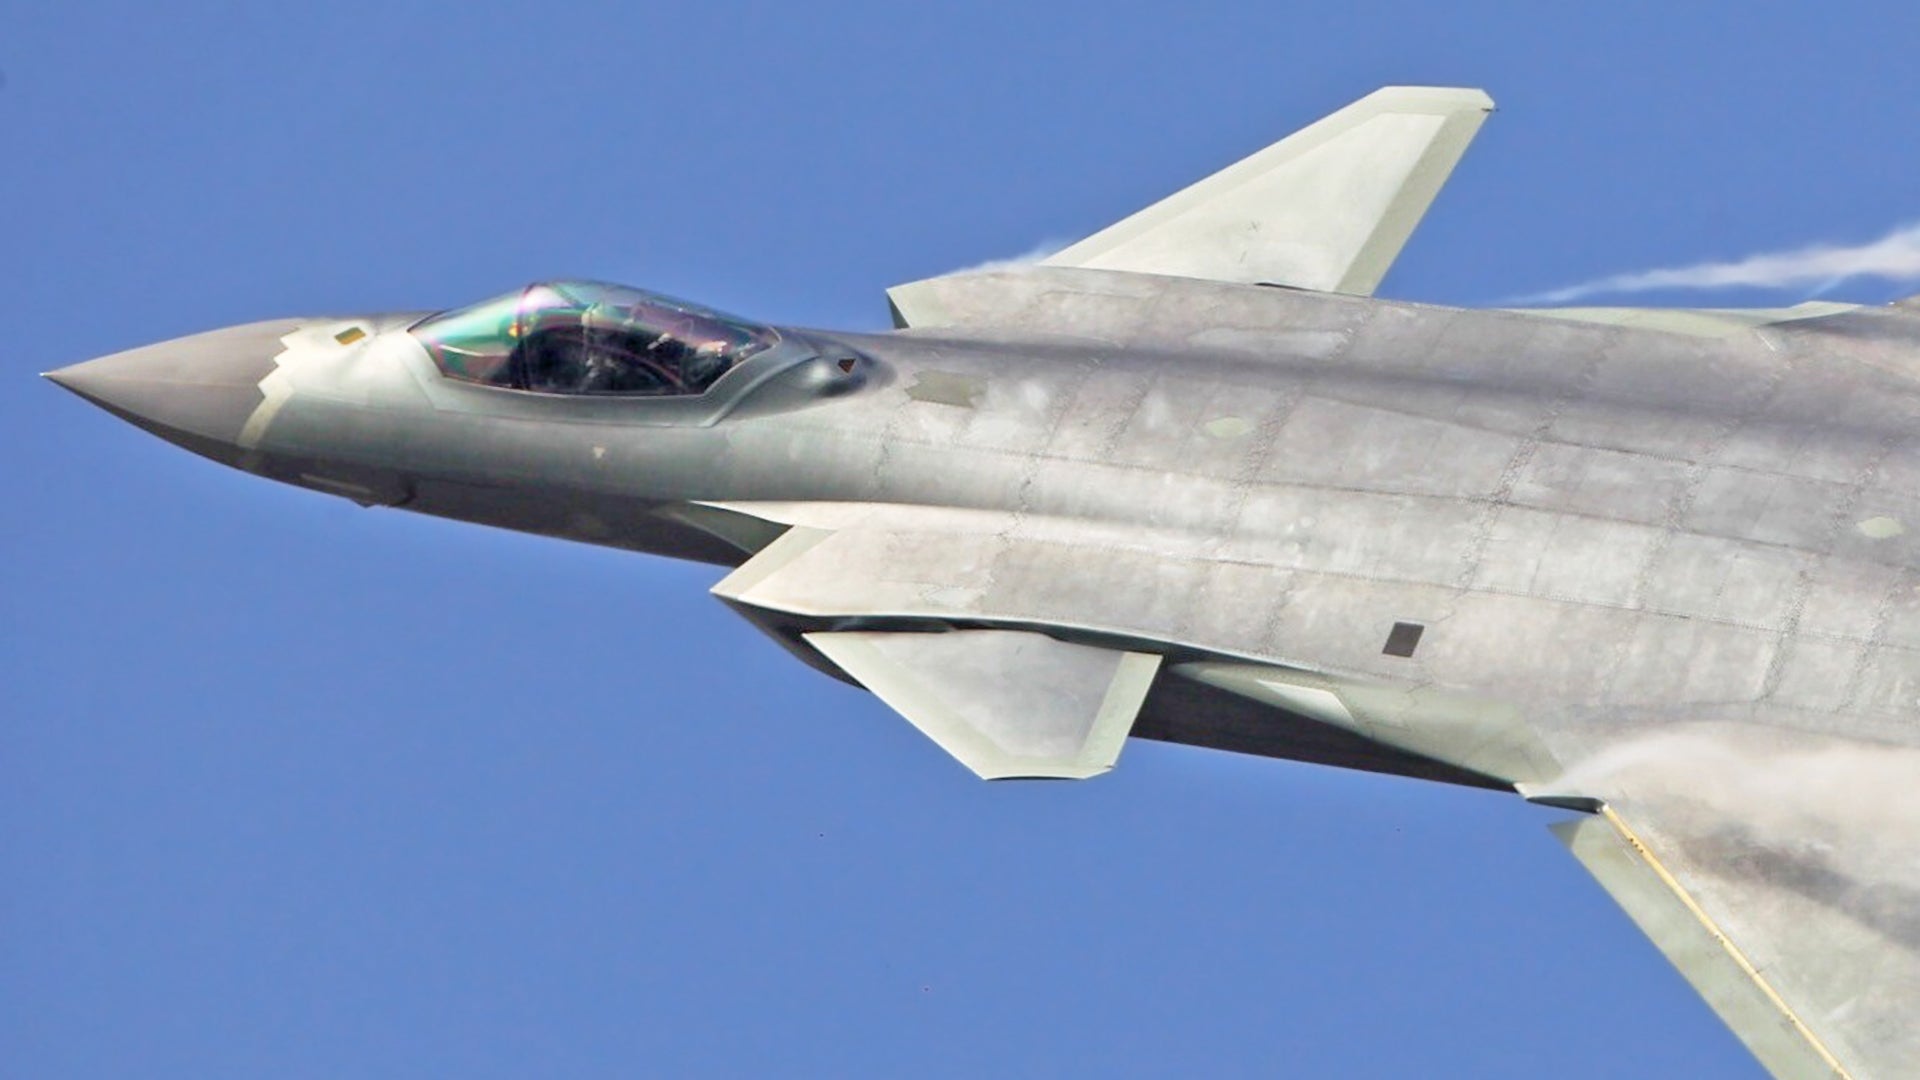 China’s J-20 Stealth Fighter Photographed Toting Massive External Fuel Tanks